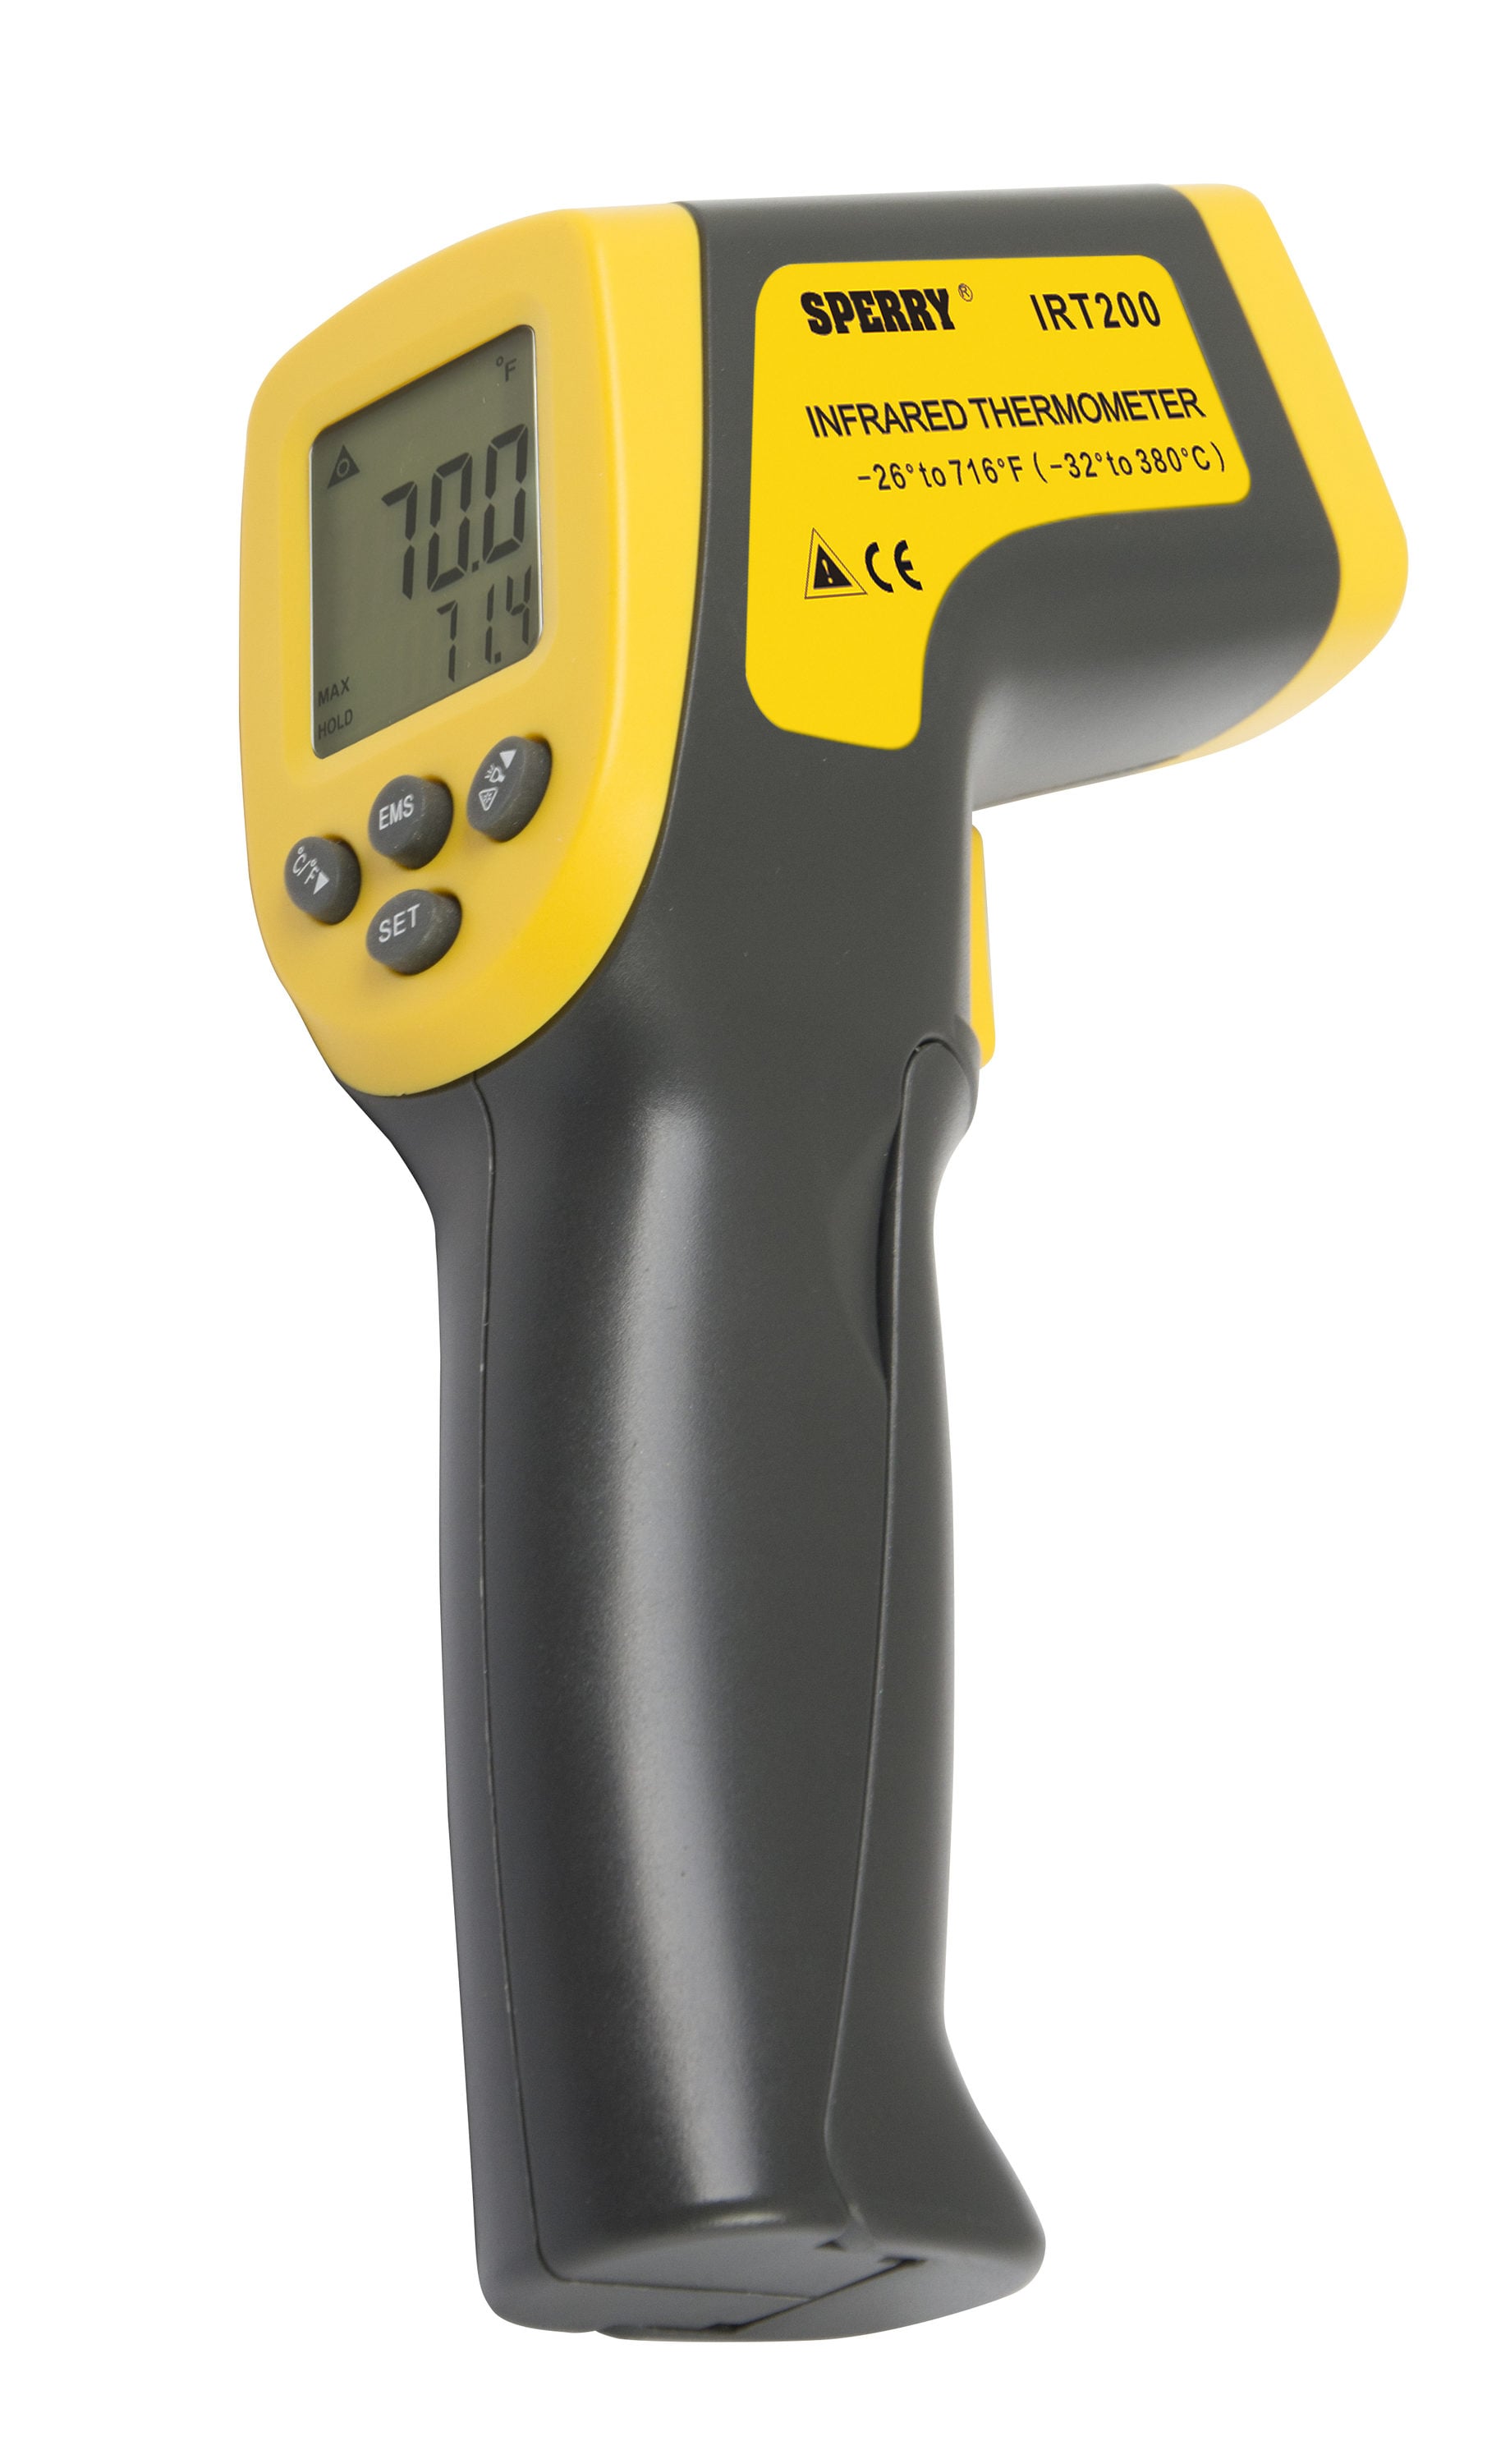 Digital Infrared Thermometer 380, No Touch Digital Laser